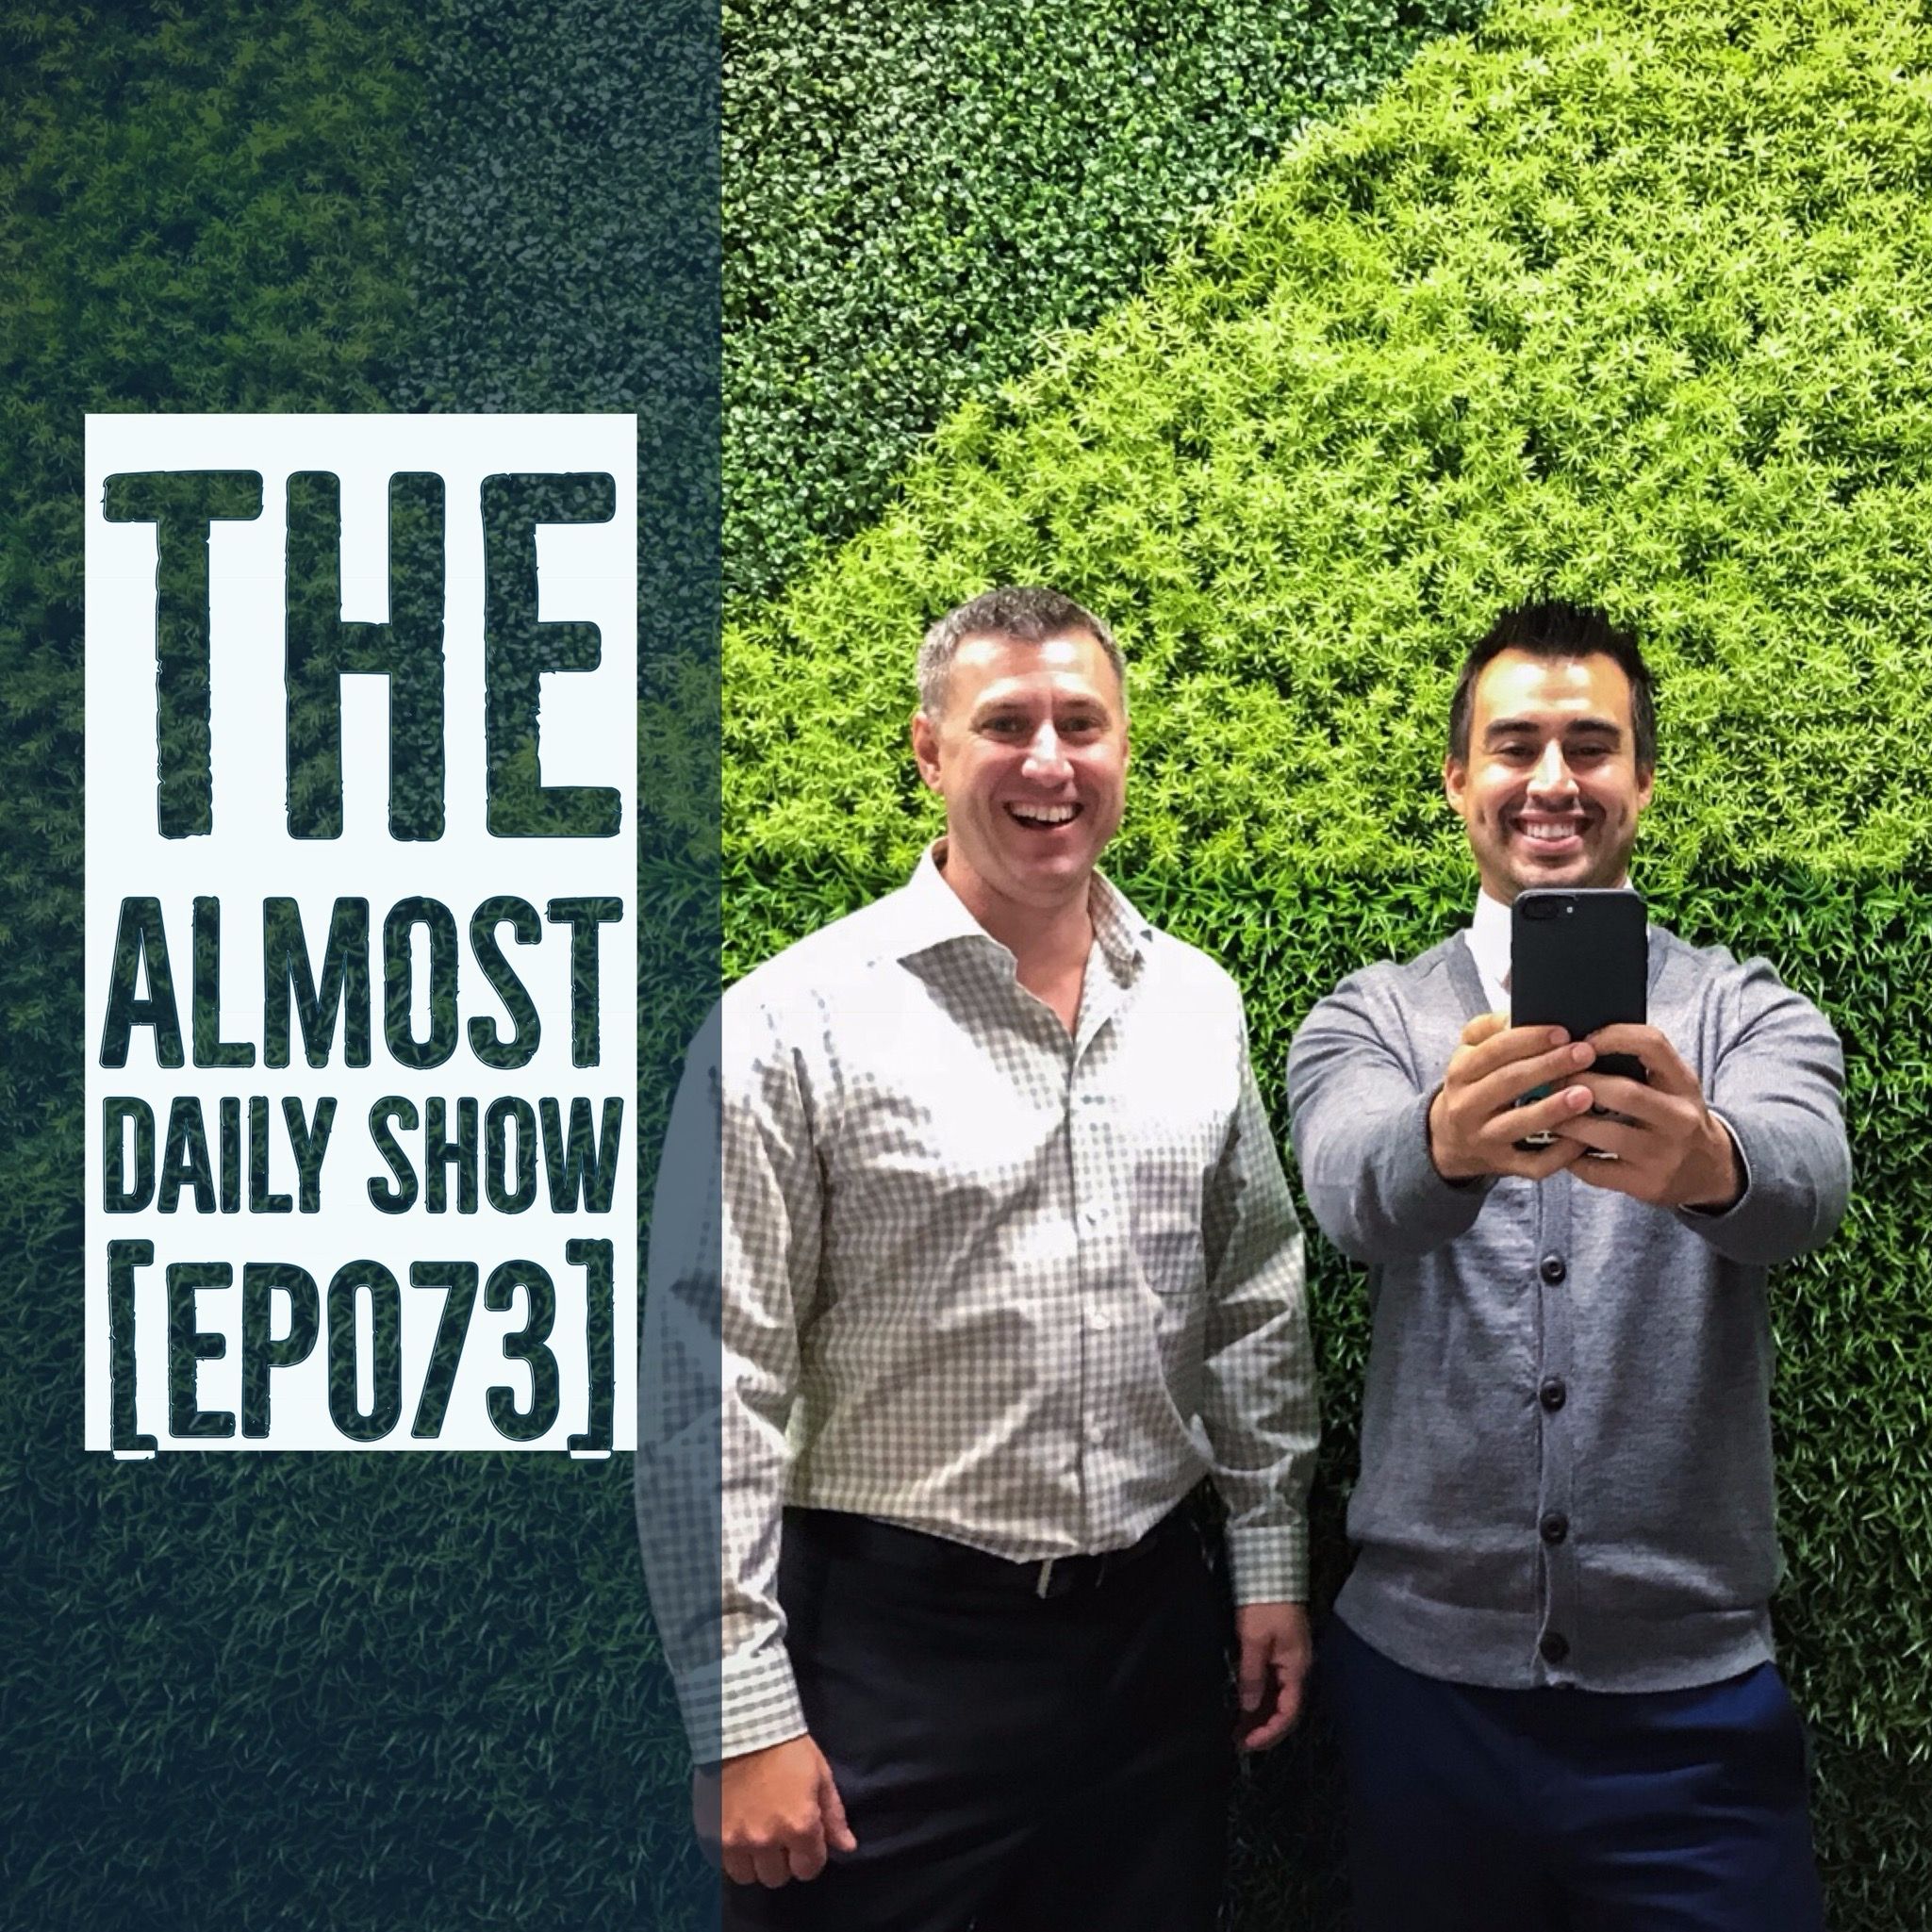 Using Videos In Your Marketing | The Almost Daily Show Ep 073